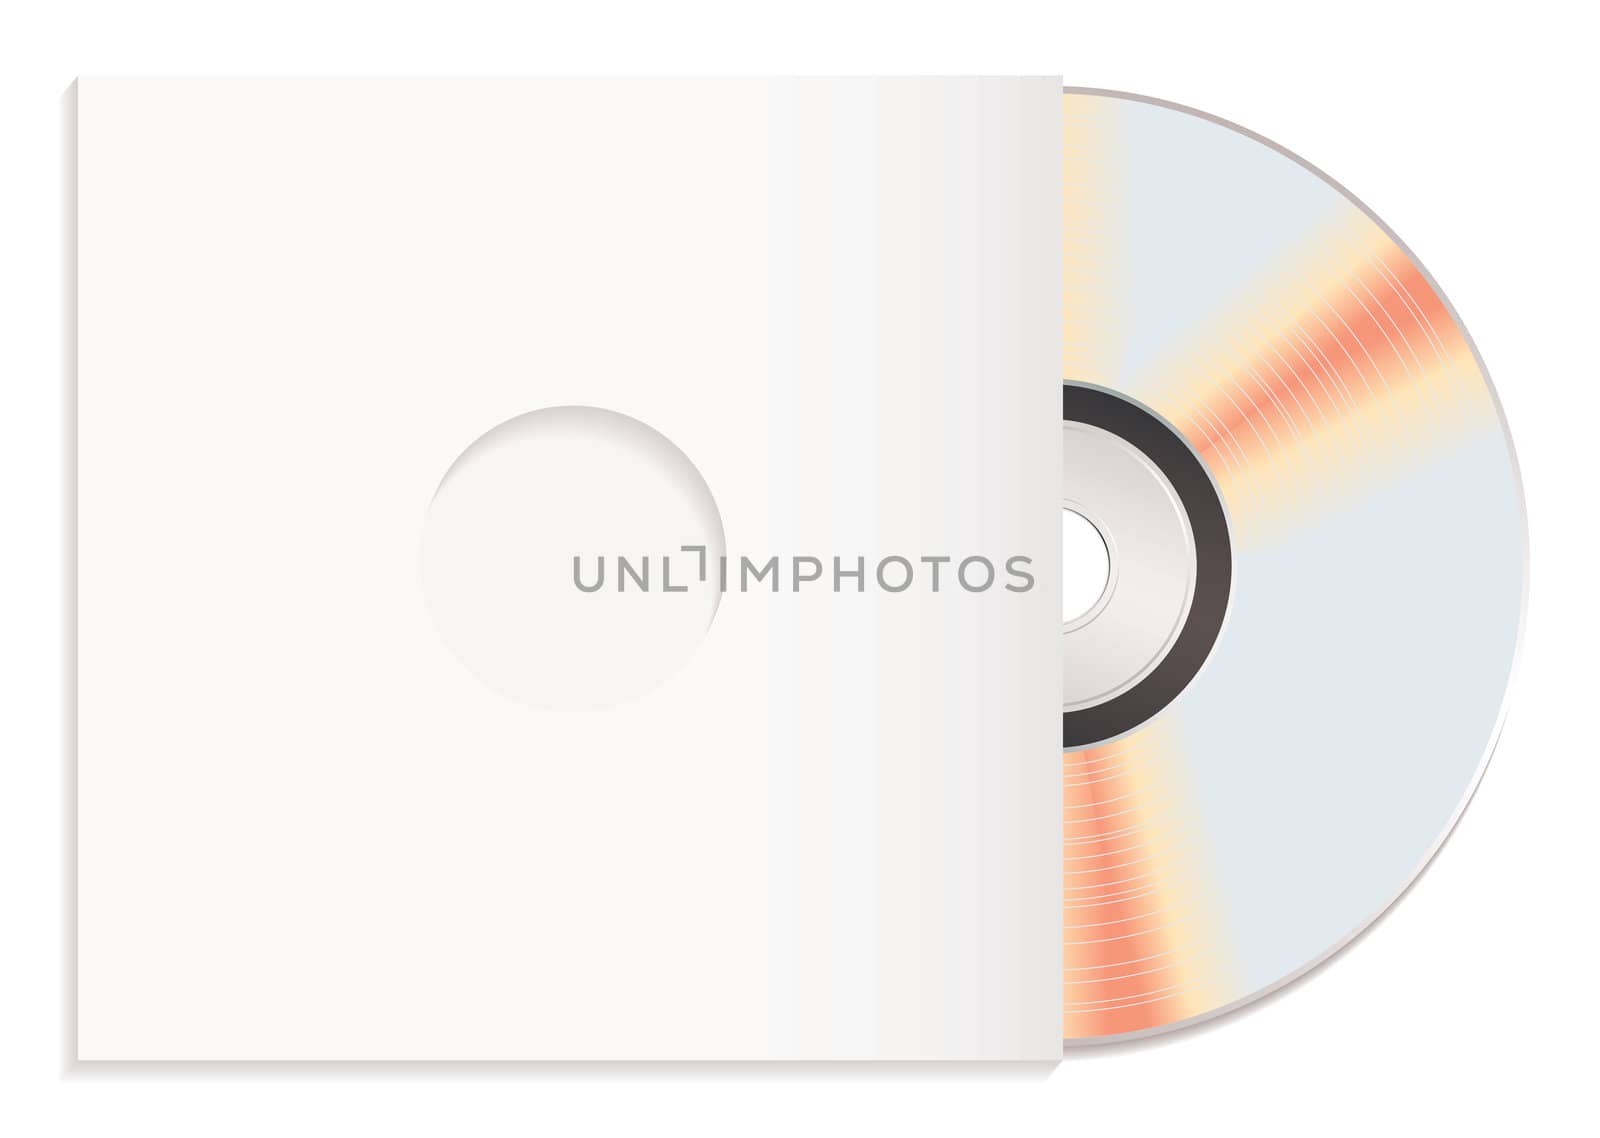 Shiny silver cd with red reflection and white compact disc cover